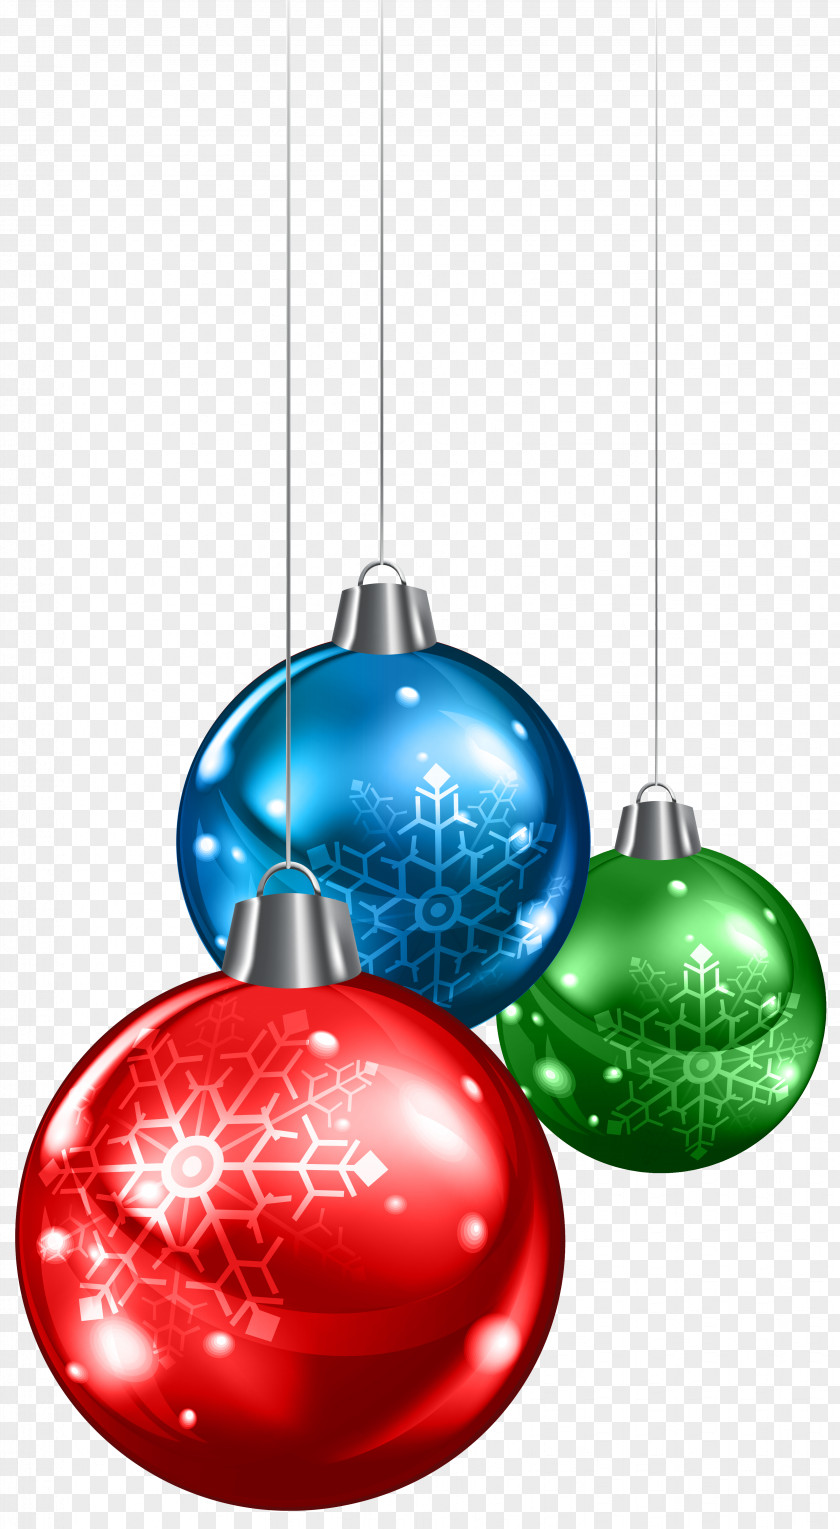 Red Green And Blue Christmas Balls Clipart Image PNG